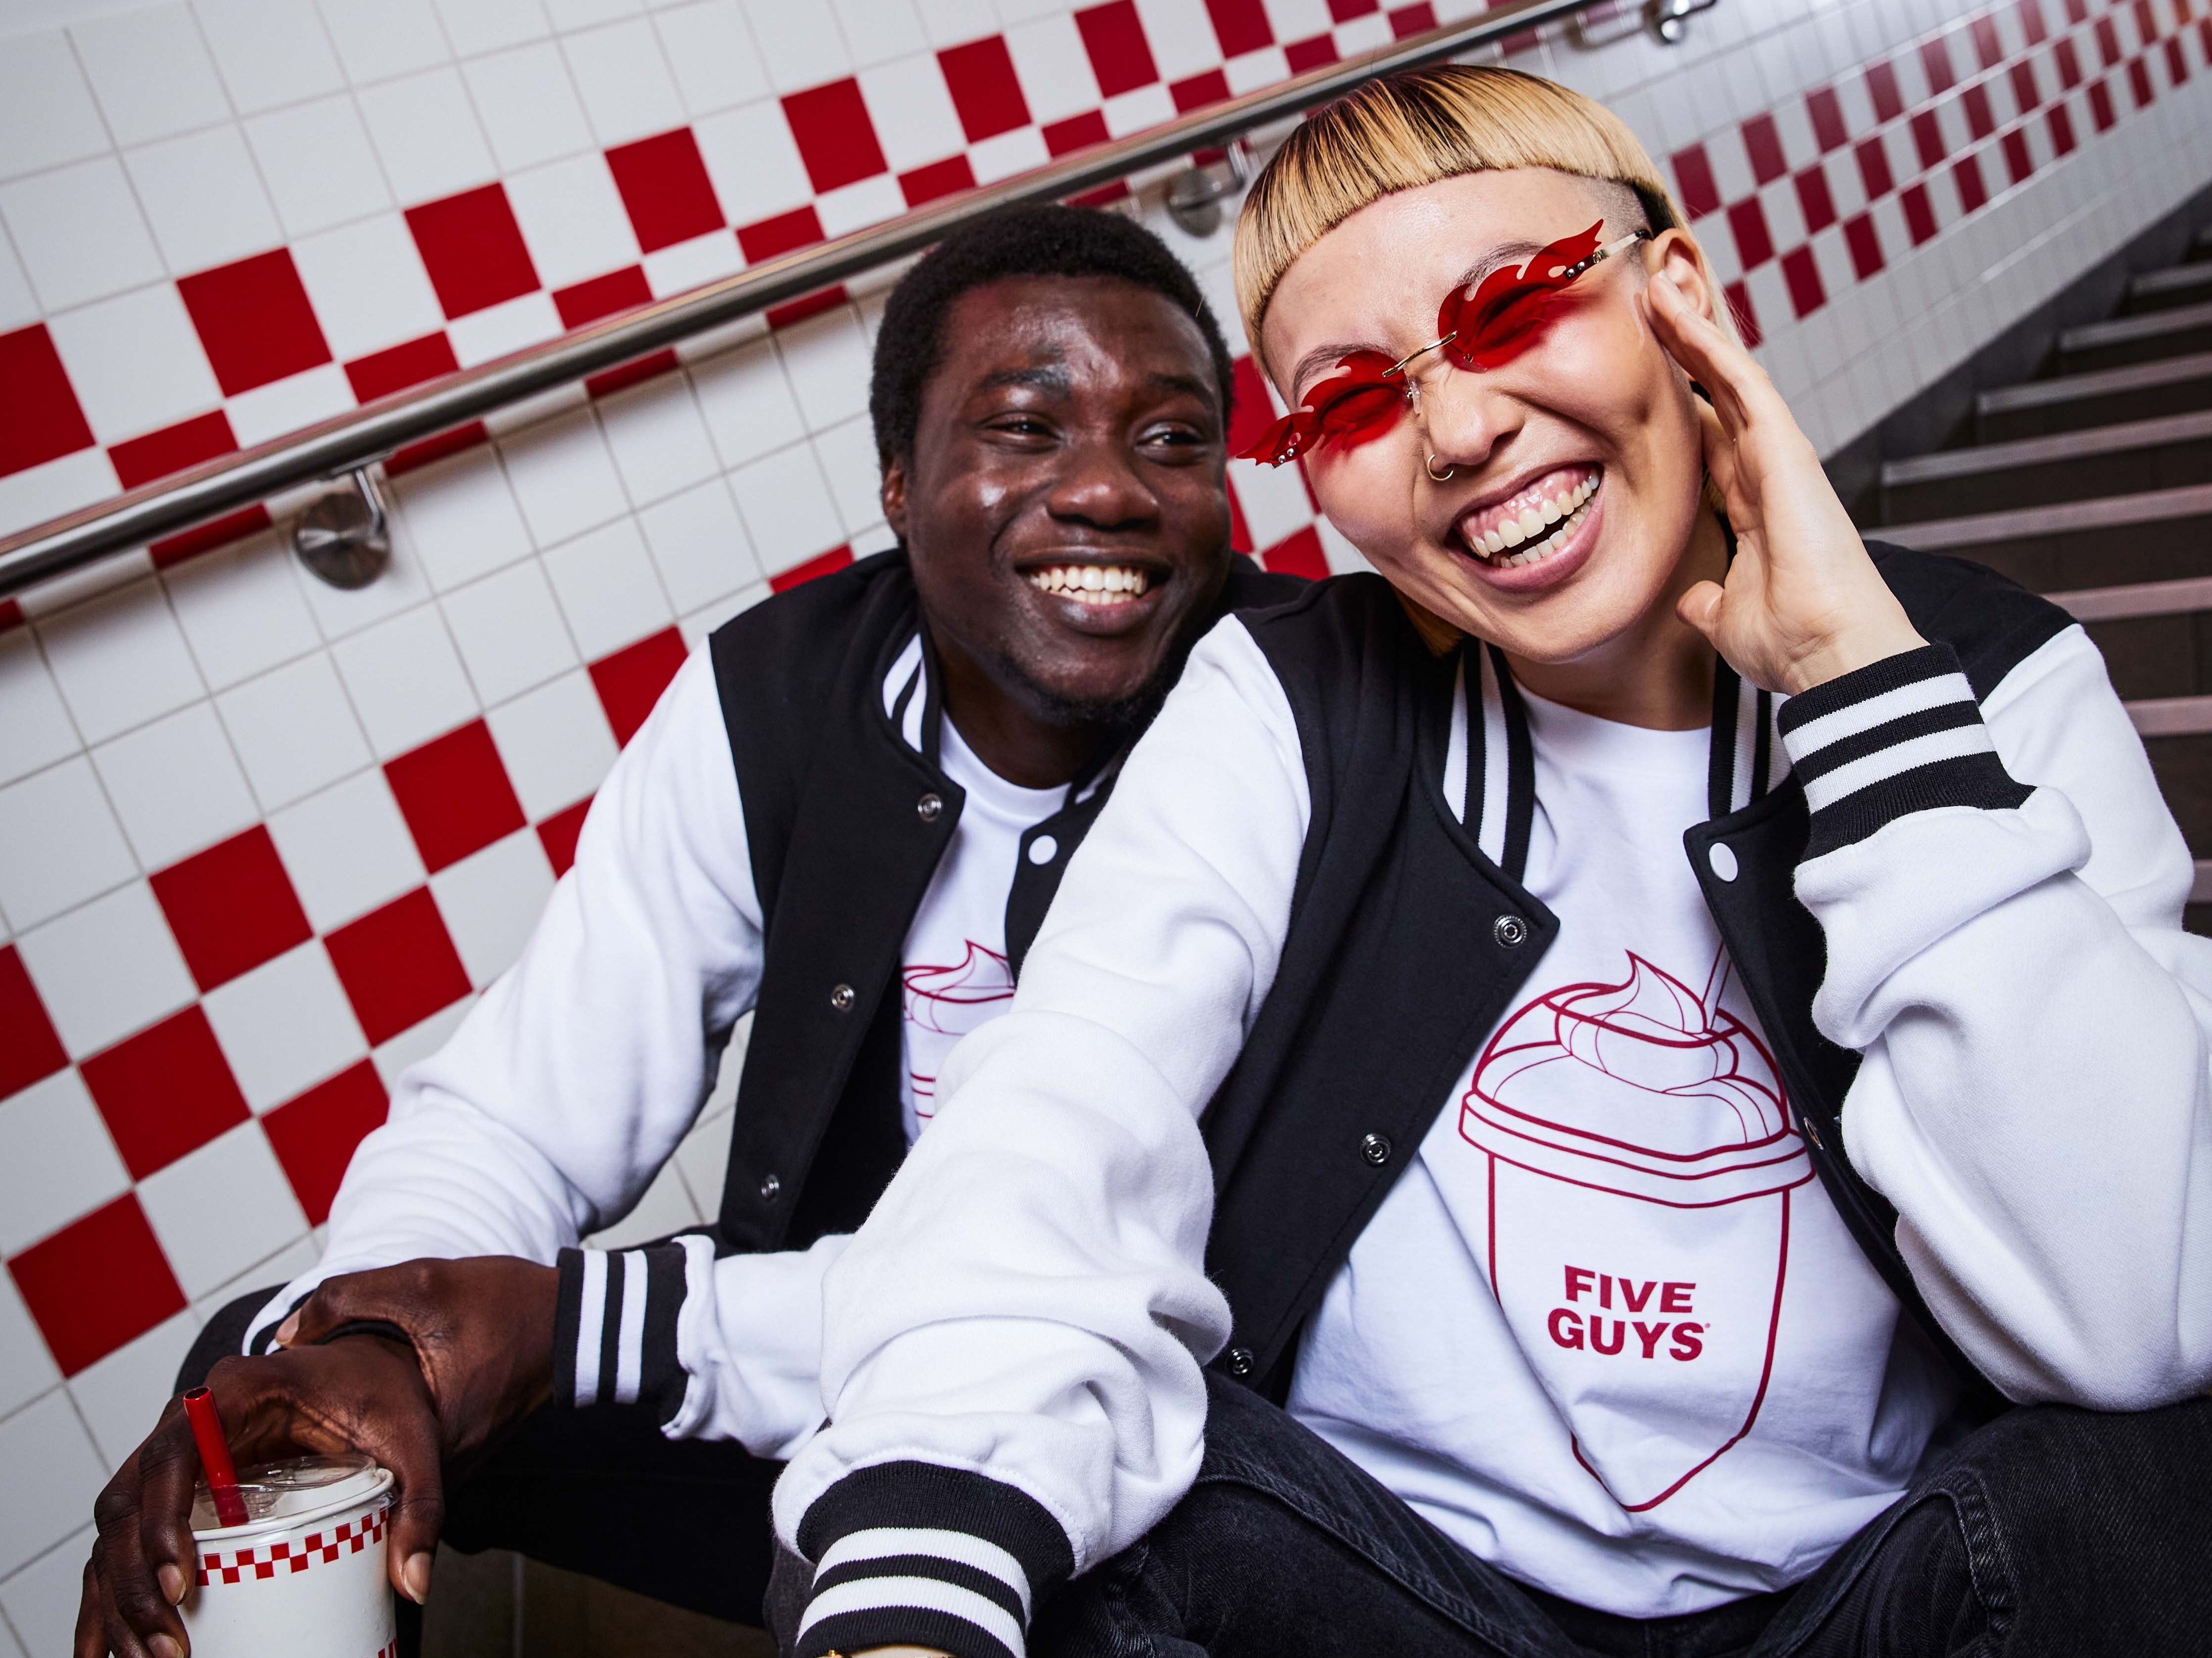 Five Guys has released its first line of branded merchandise in the UK